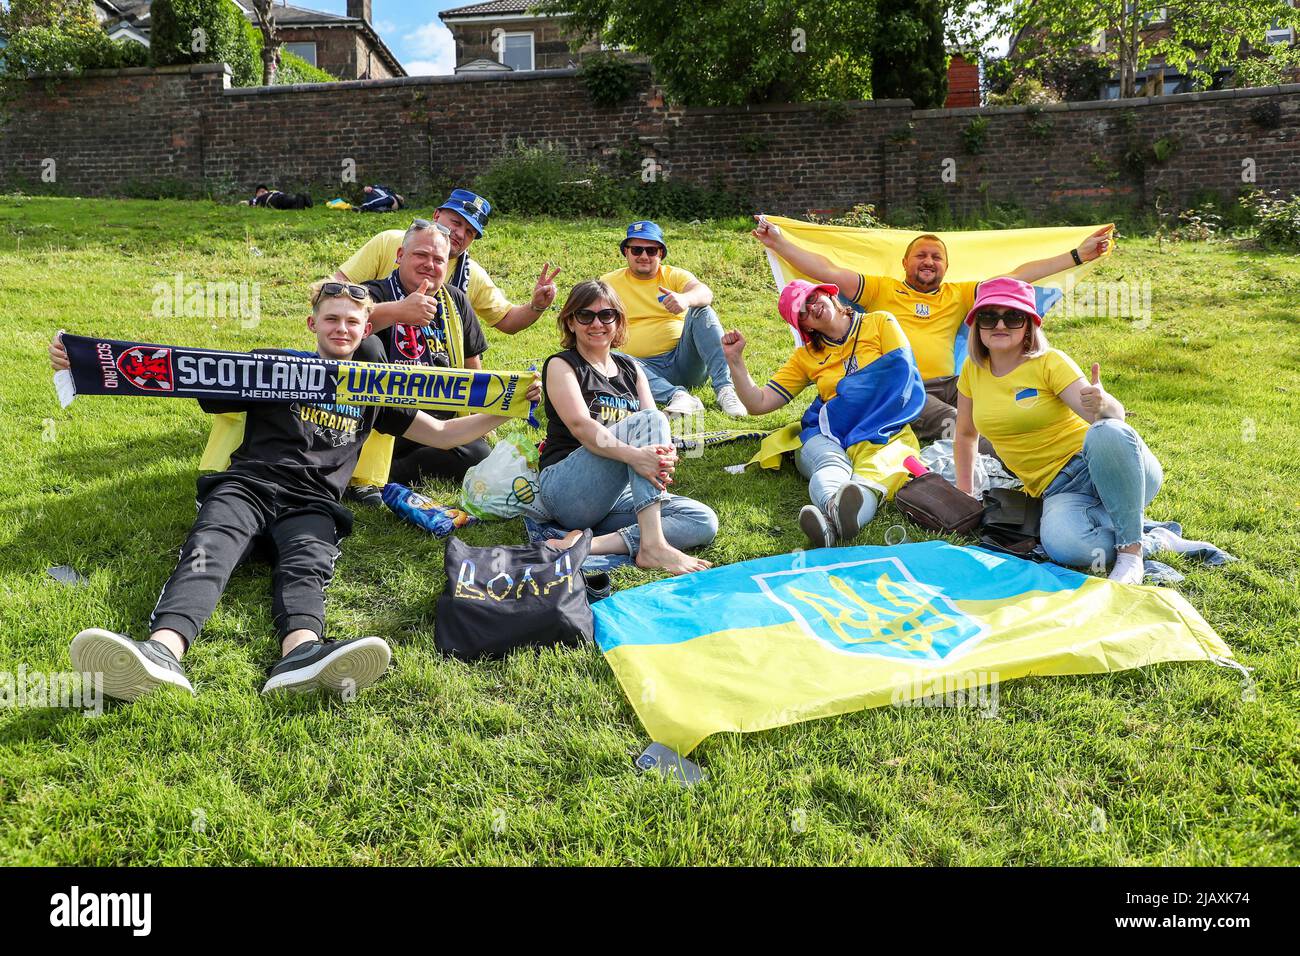 Glasgow, UK. 01st June, 2022. As Hampden Park, the national football stadium of Scotland, prepares for the FIFA world cup play-off semi-final between Scotland and Ukraine, the Ukrainian supporters arrive early and prepare for the game with picnics on nearby grassy areas and communal singing of the Ukrainian national anthem. Credit: Findlay/Alamy Live News Stock Photo